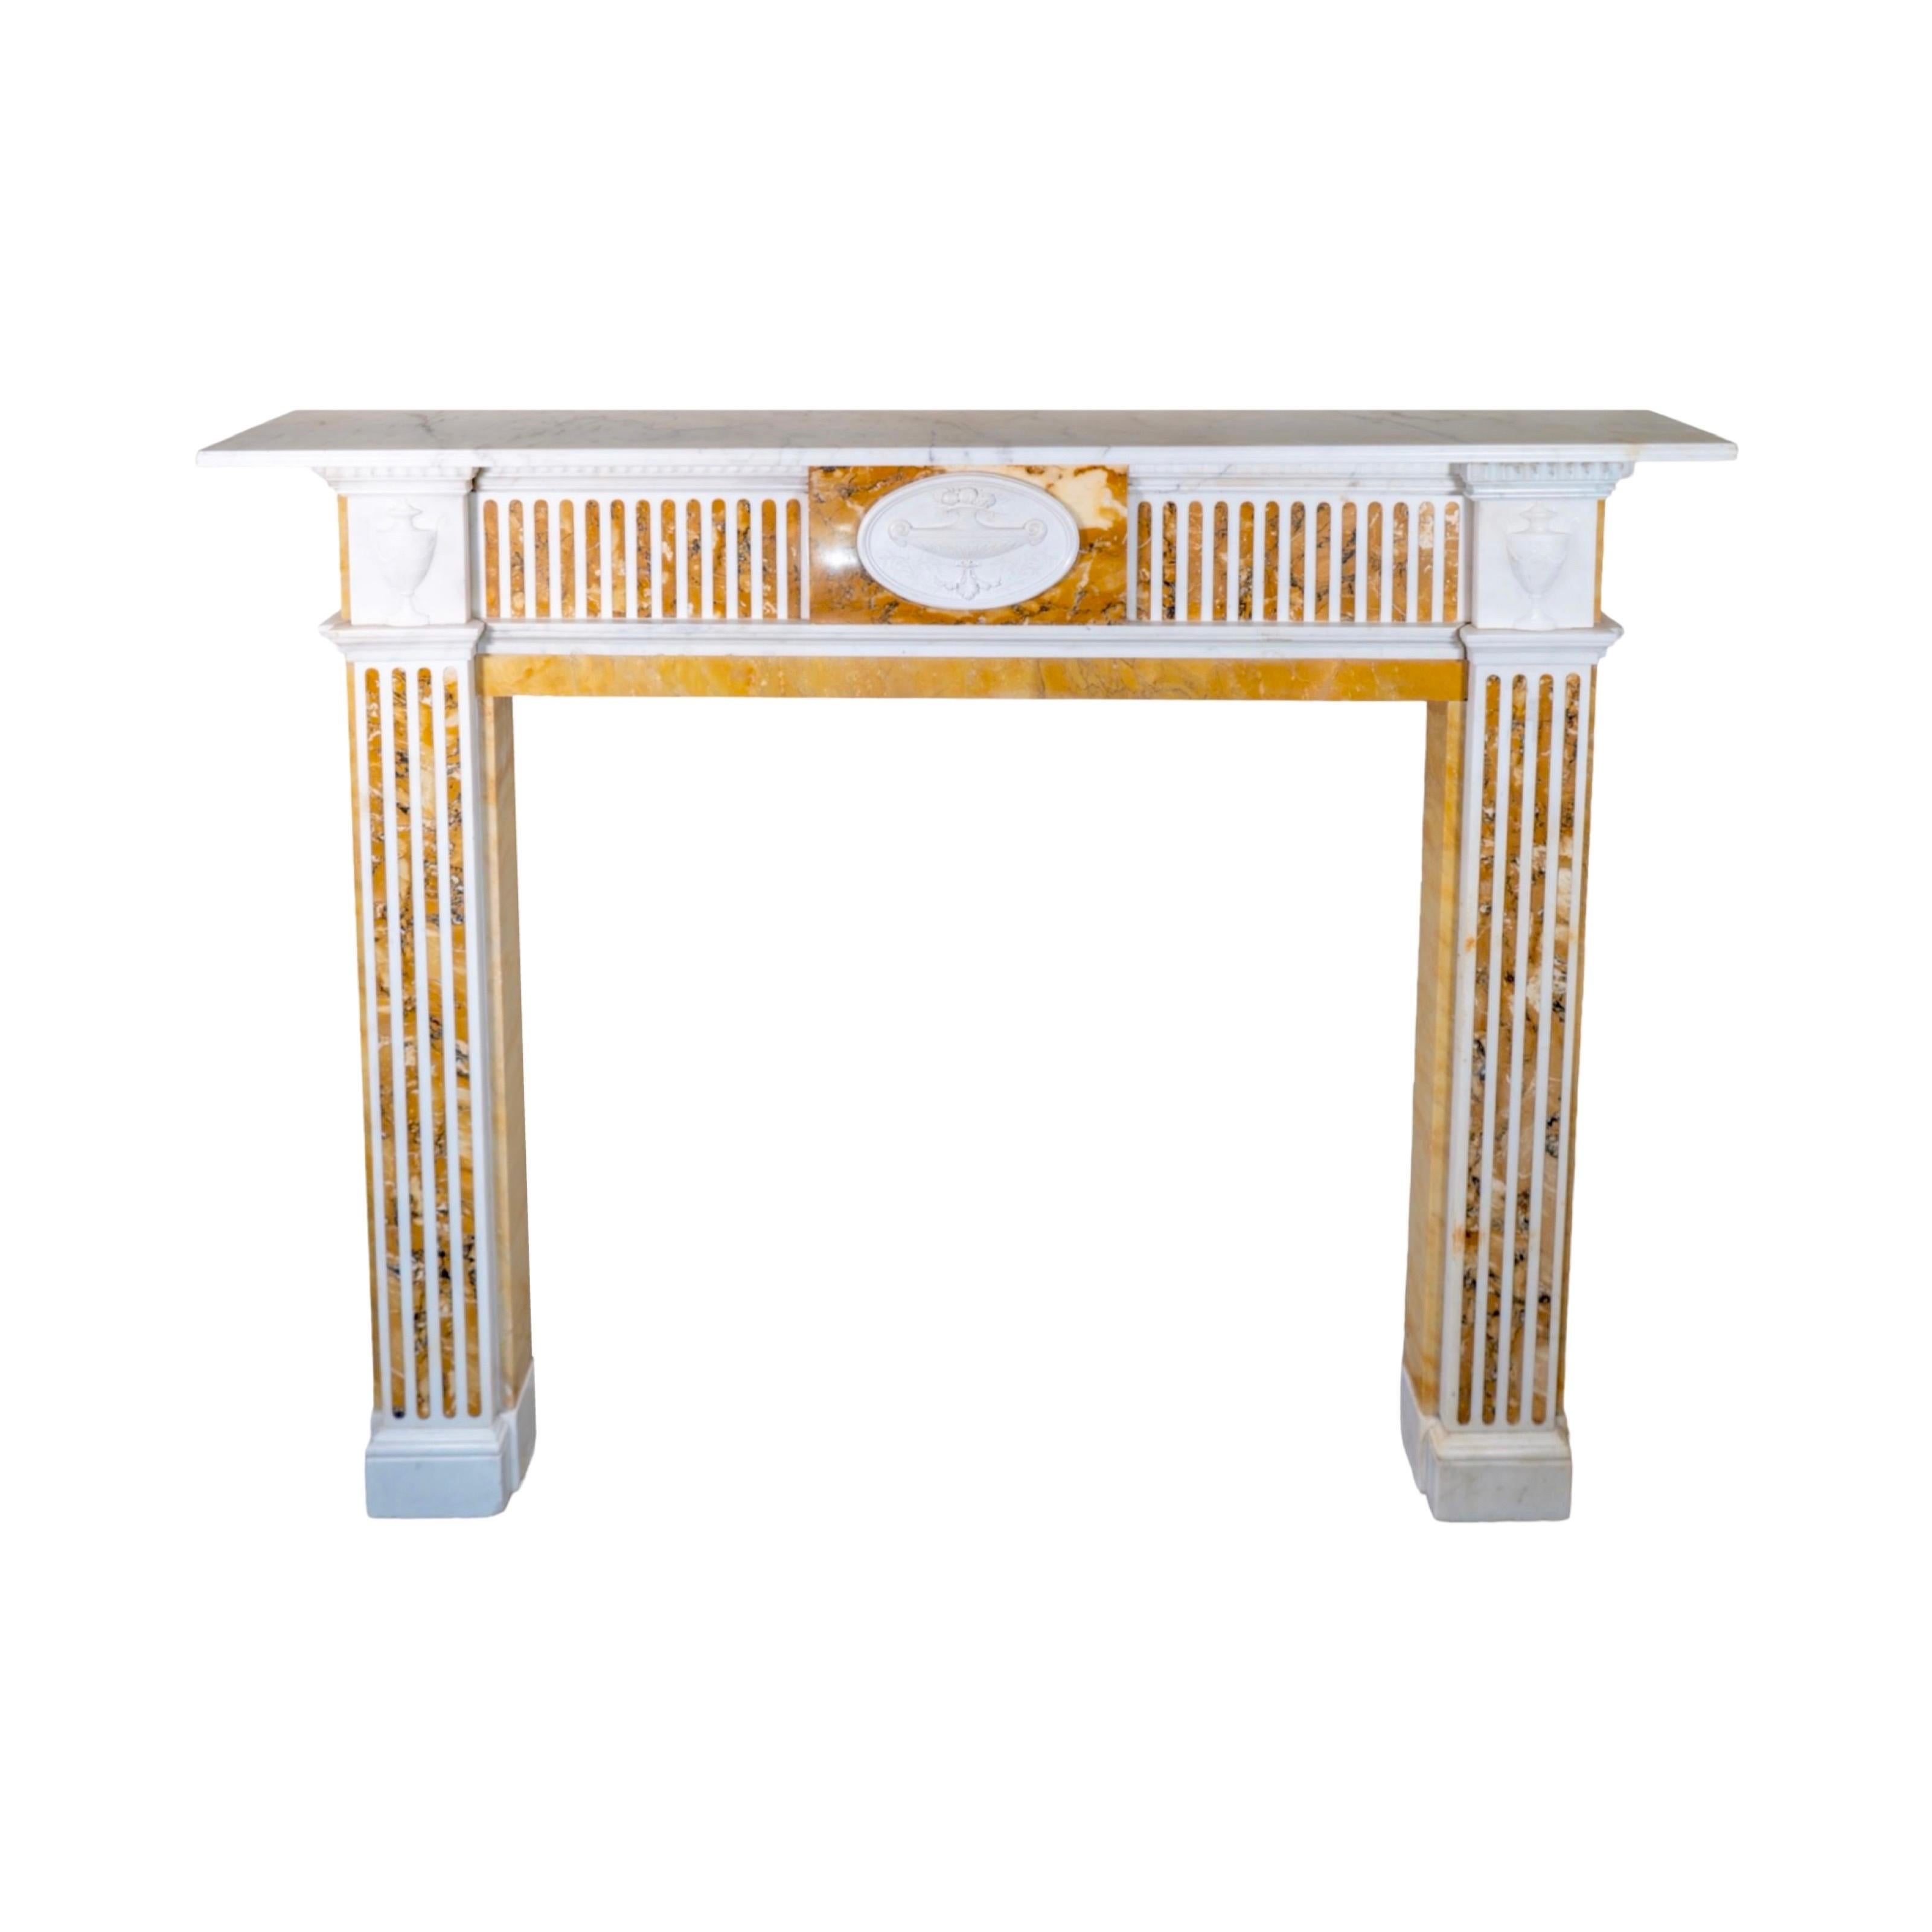 Elevate your fireplace with this exquisite antique English Brocatelle de Sienna Marble Mantel. Crafted with a mix of White veined carrara marble and Jaune de Valence marble, this mantel exudes elegance and luxury. Dating back to the 1850s, it